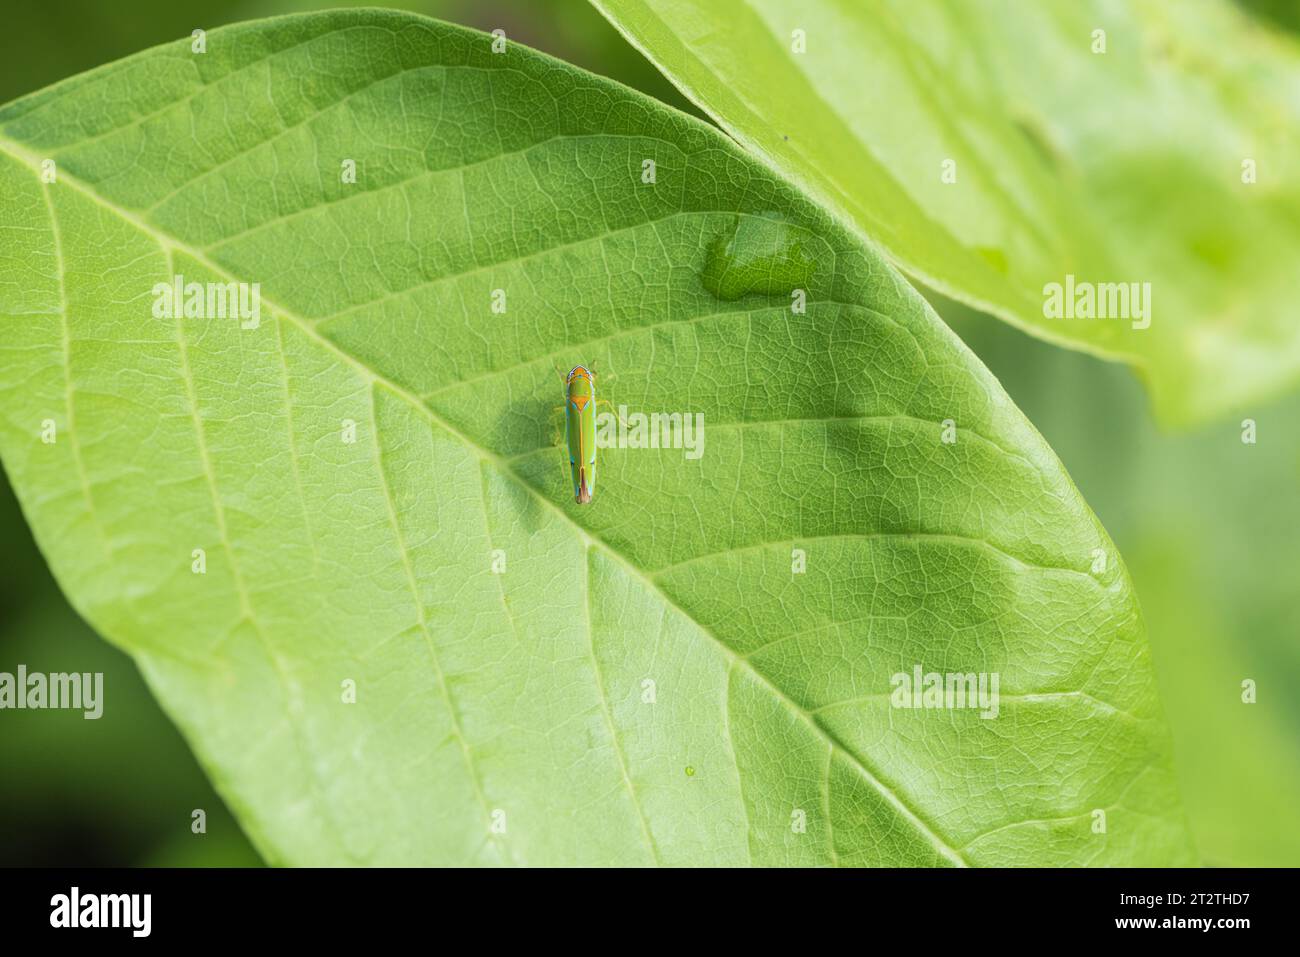 Un-identified Leafhopper/ Sharpshooter perched on a leaf in Amazonian Ecuador Stock Photo